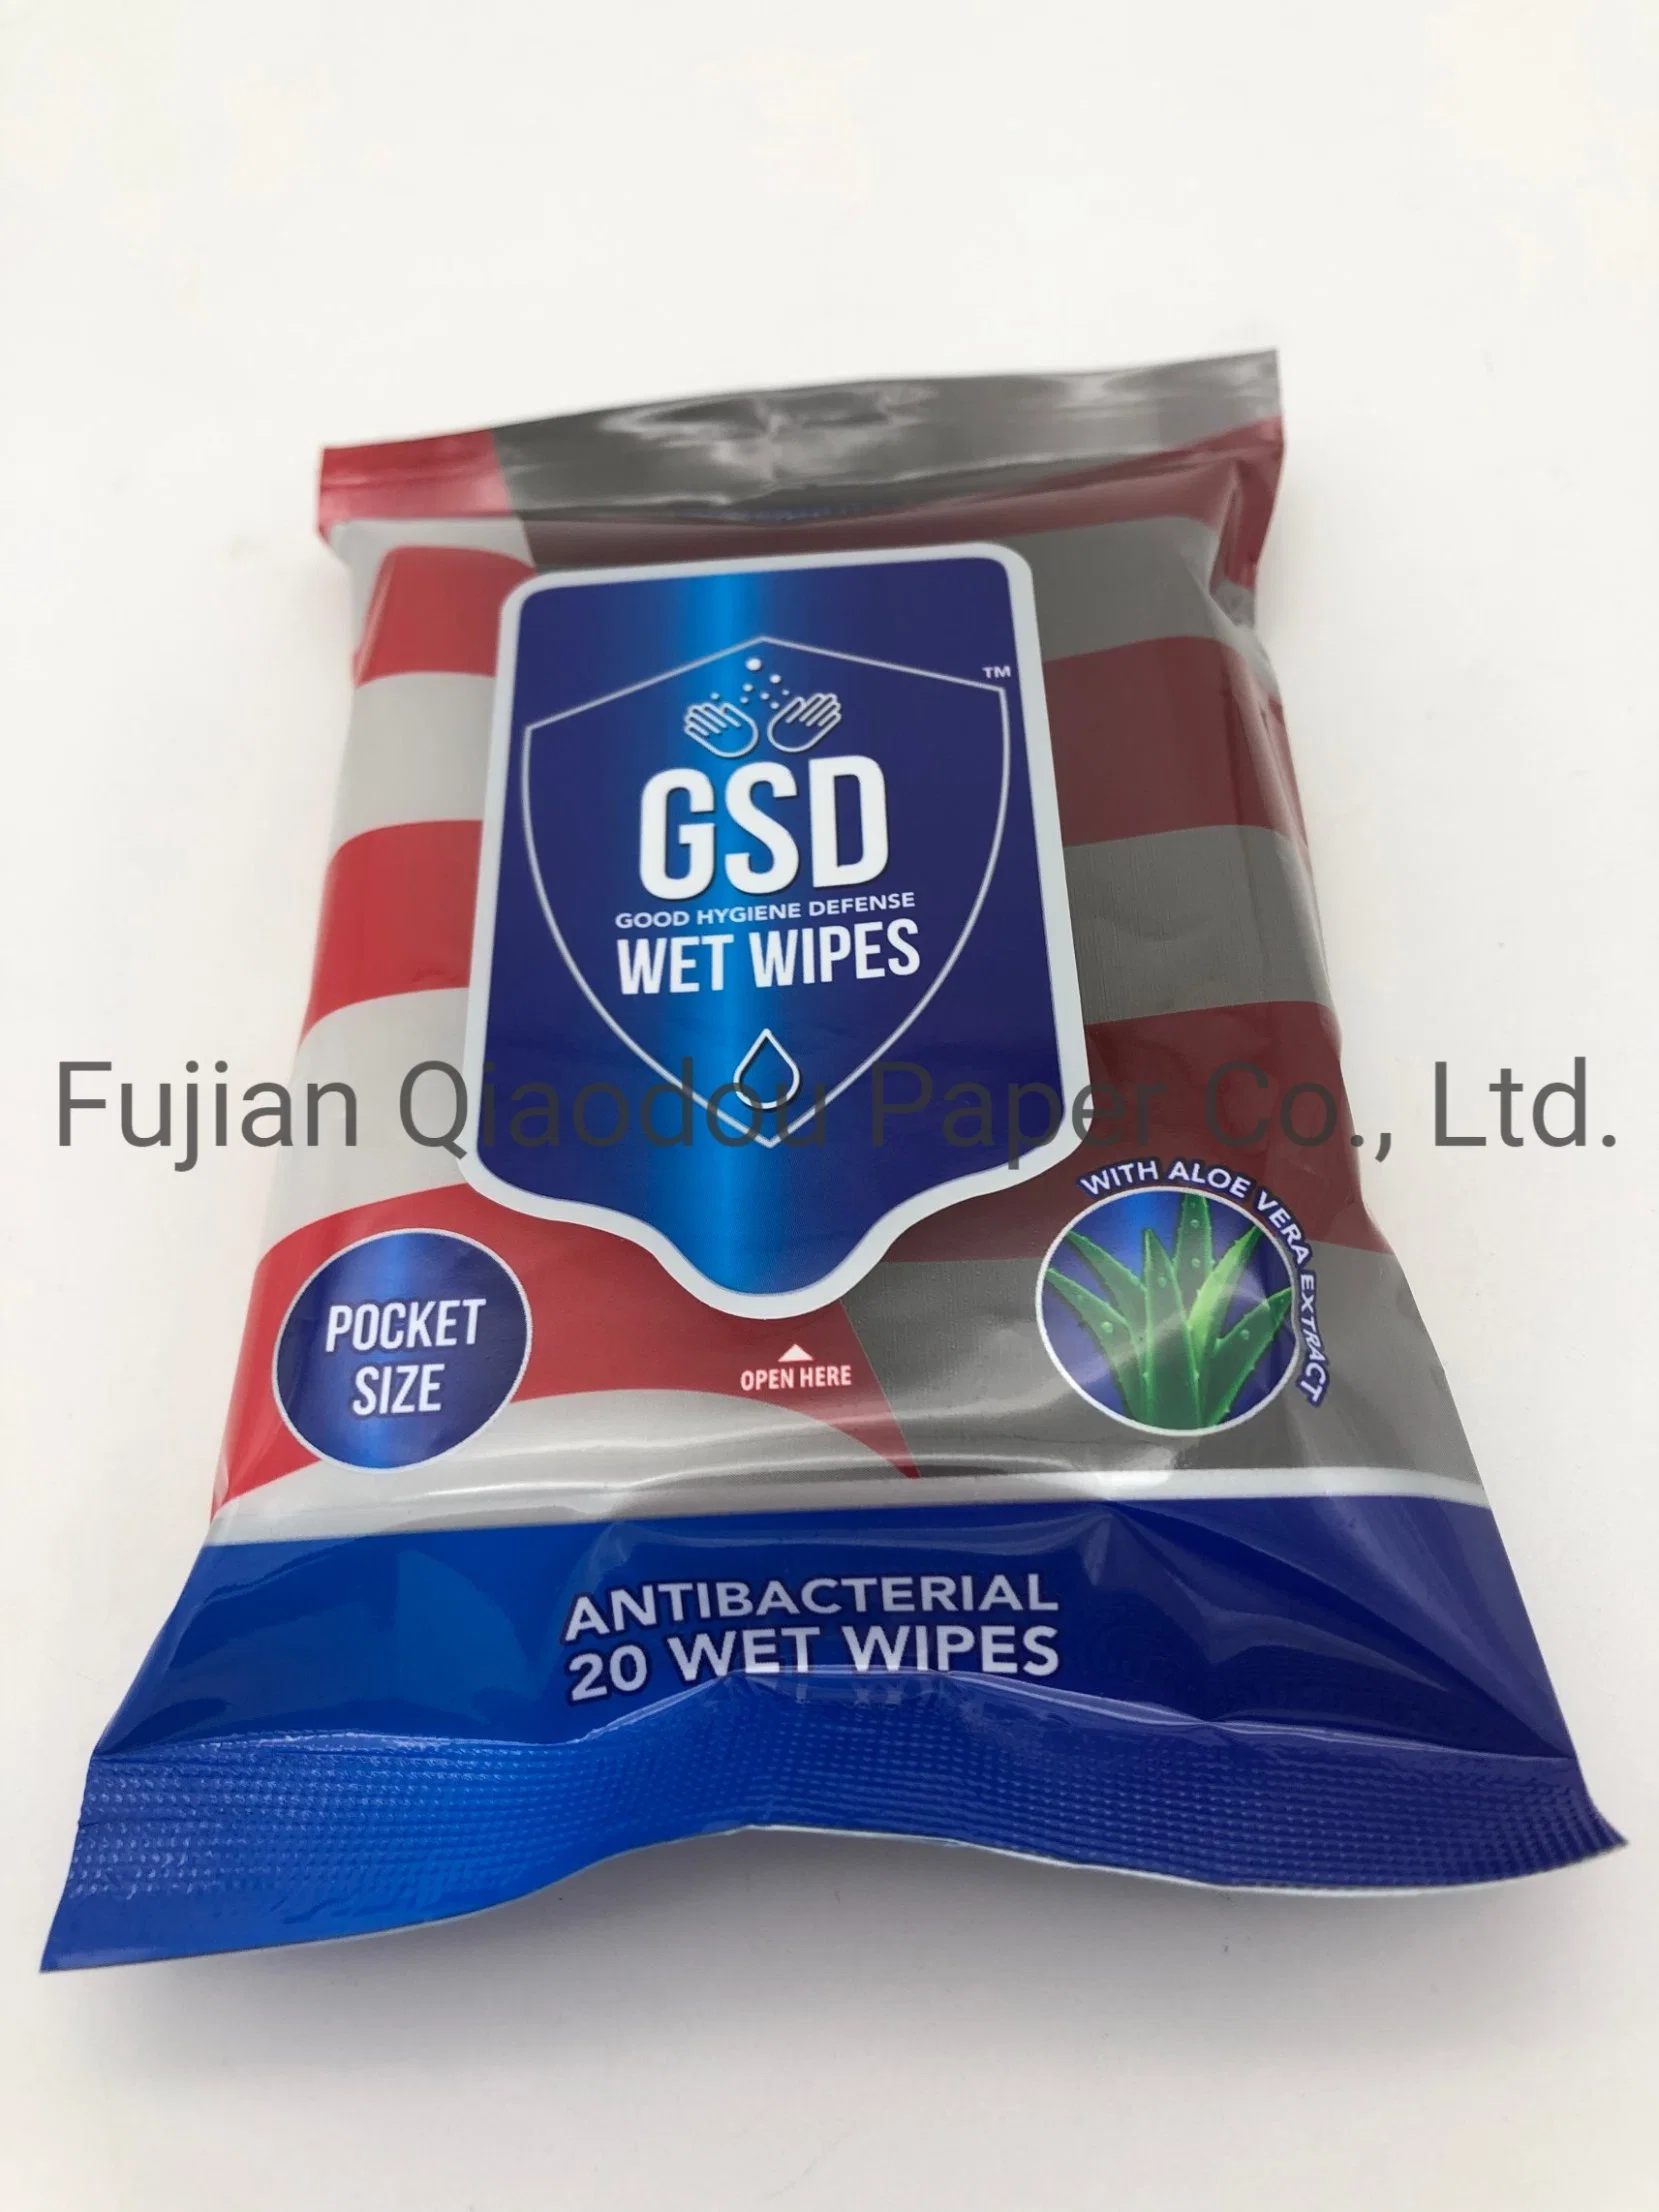 China Qiaodou Manufacturer 75% Alcohol Portable Cleaning Wet Wipes Disinfectant Wipes Antibacterial Cleaning Wipes